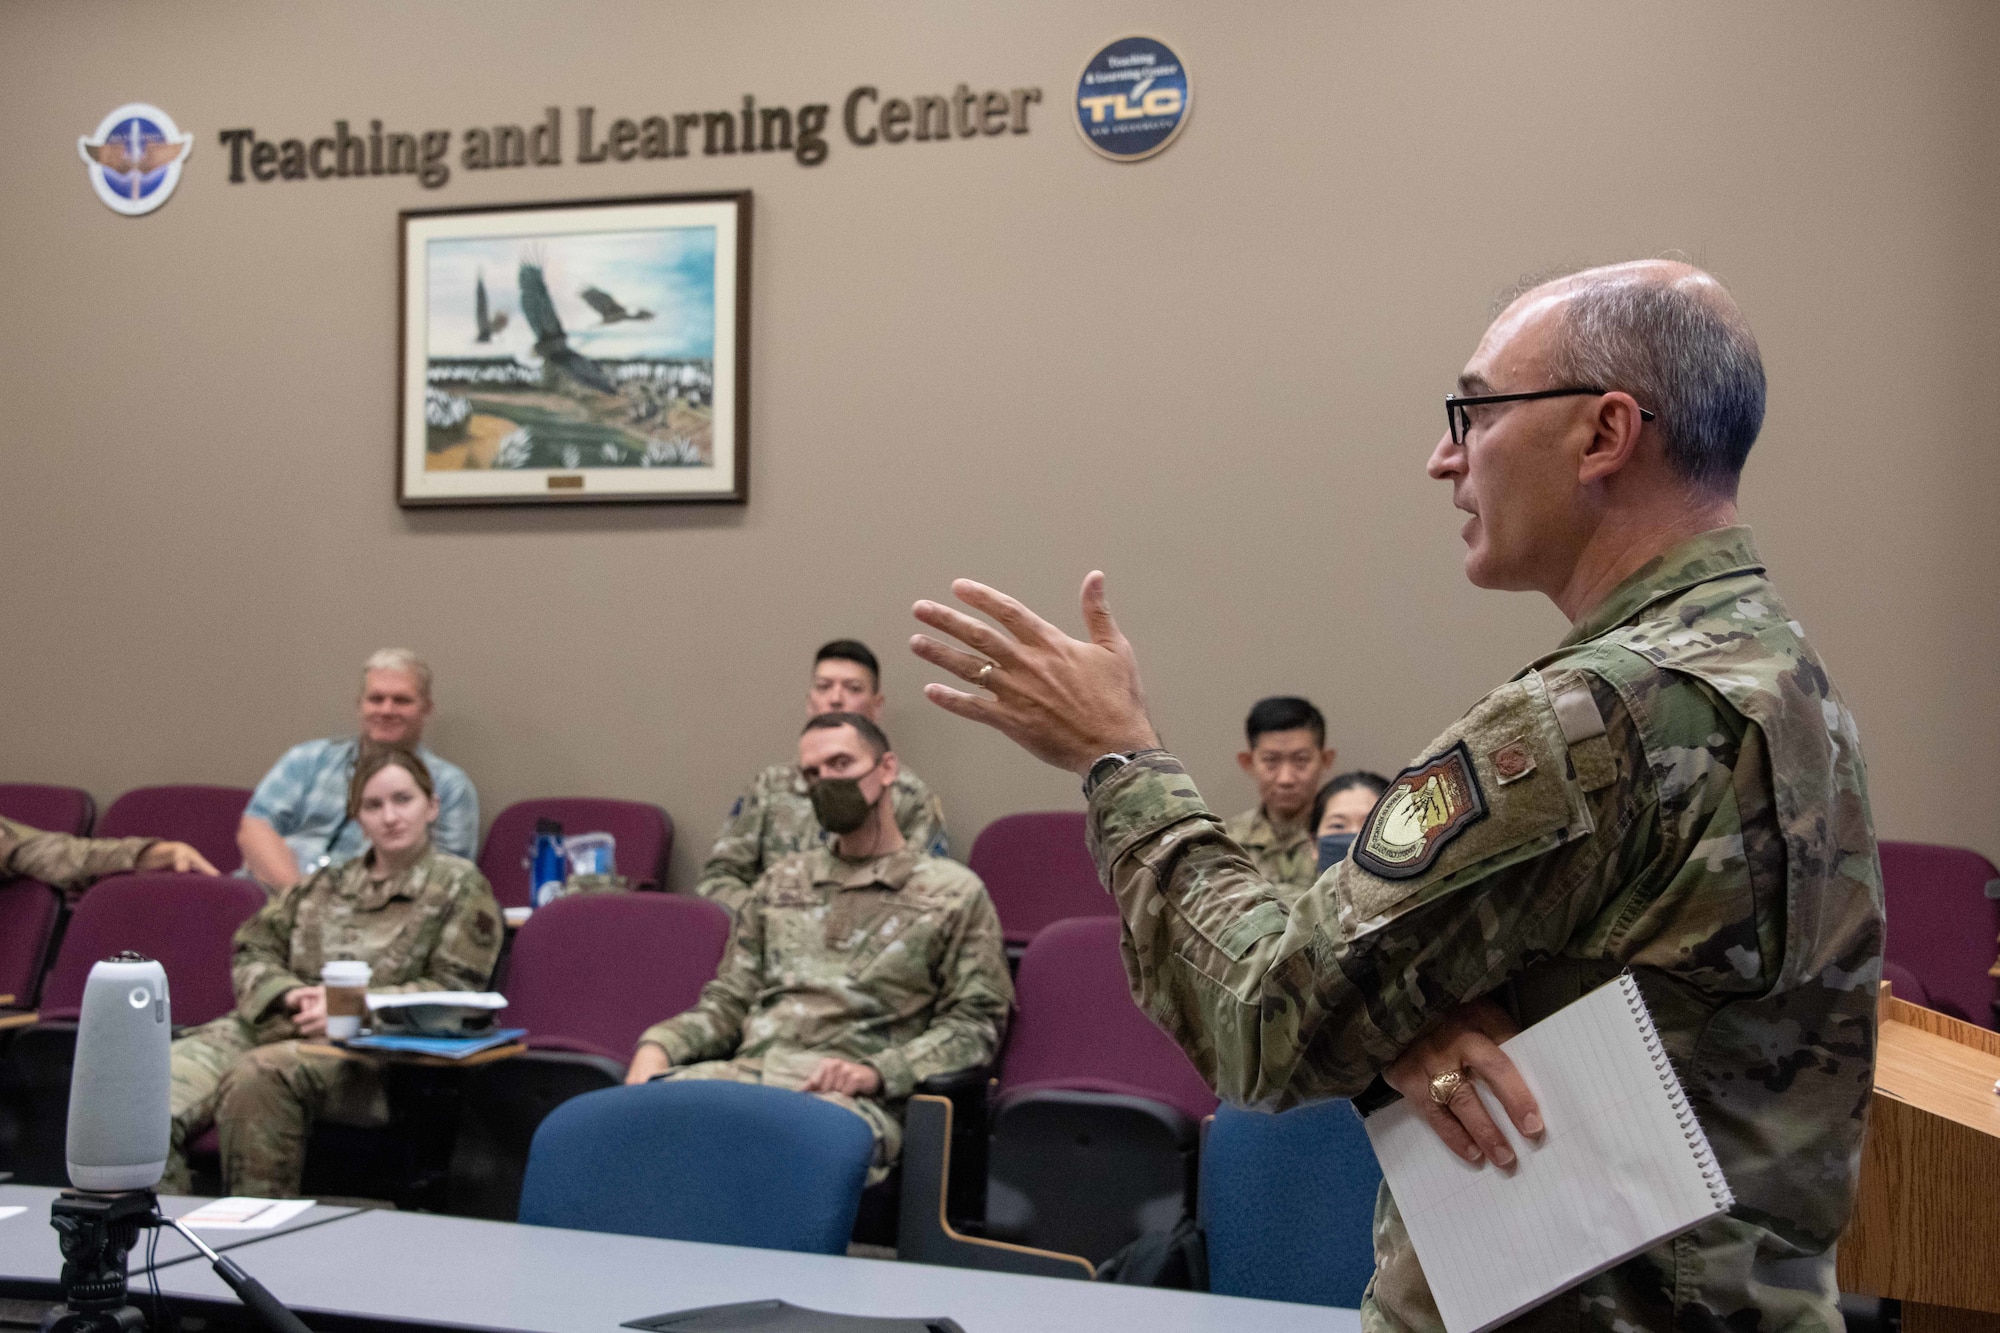 Maxwell AFB, Ala. – Col. Kevin Parker, Associate Dean, Air Force Cyber College, leads U.S. Air Force and U.S. Space Force Language Enabled Airmen Program (LEAP) scholars attending the Cyber Language Intensive Training Event (LITE) through a role playing scenario involving fictitious air operations in a forward theater that are potentially impacted by cybersecurity issues, Jul.22, 2021. Cyber LITE is a Strategic Power Competition course co-sponsored by the Air Force Culture and Language Center and Air Force Cyber College for advanced language proficiency LEAP scholars who have career-related ties to cyber operations and/or an academic background in cyber studies. (U.S. Air Force photo by Melanie Rodgers Cox)